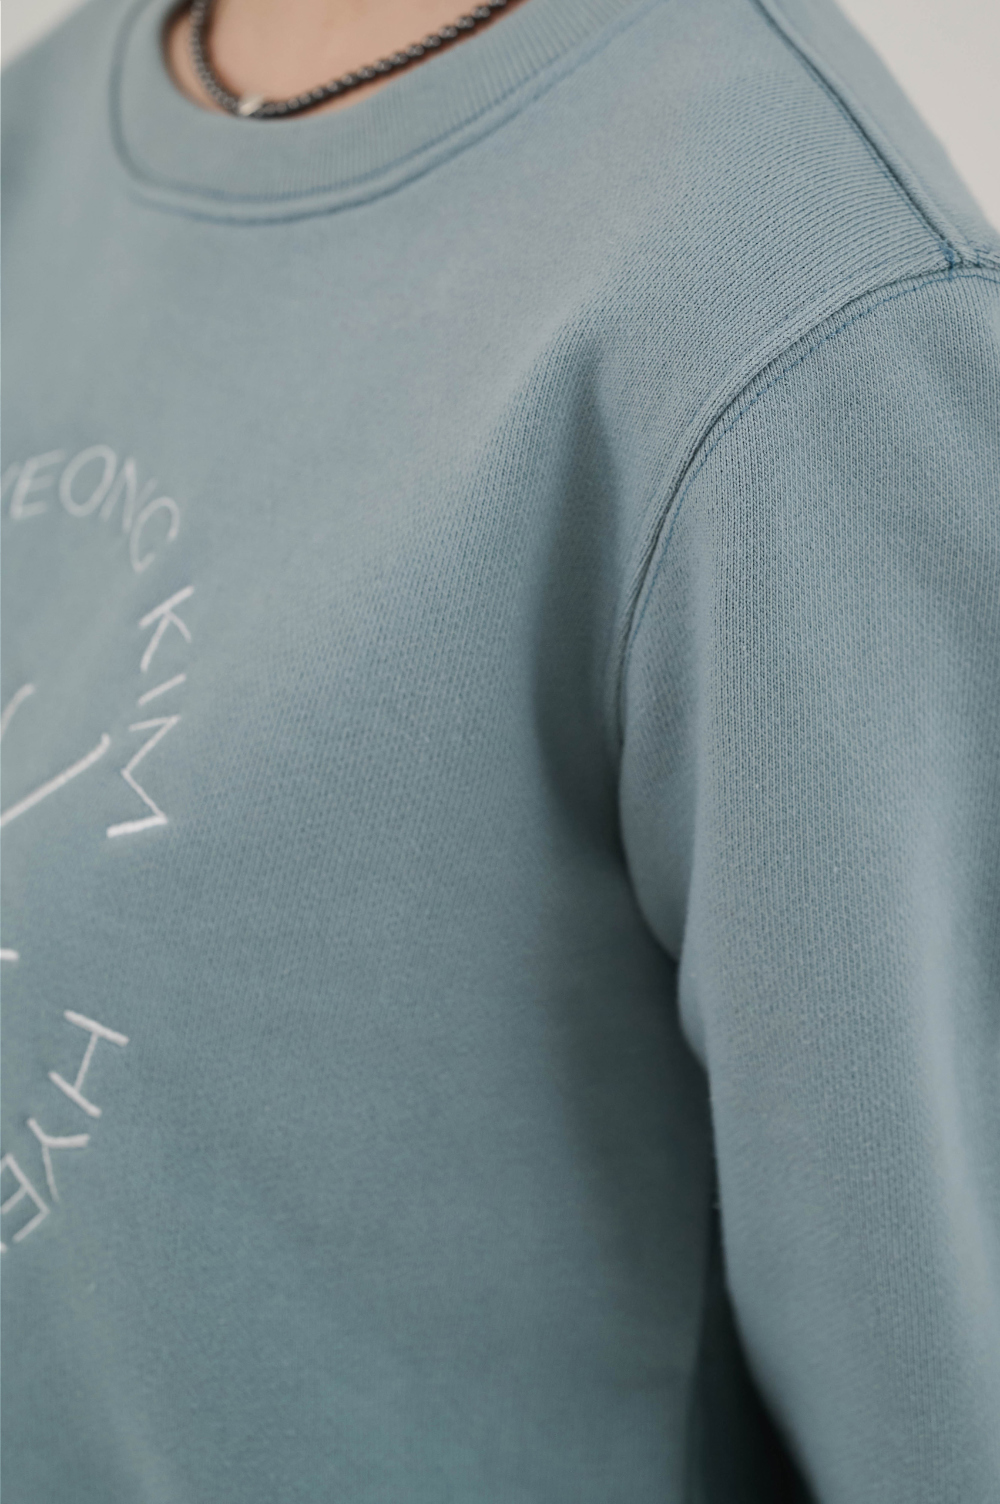 long sleeved tee detail image-S36L2